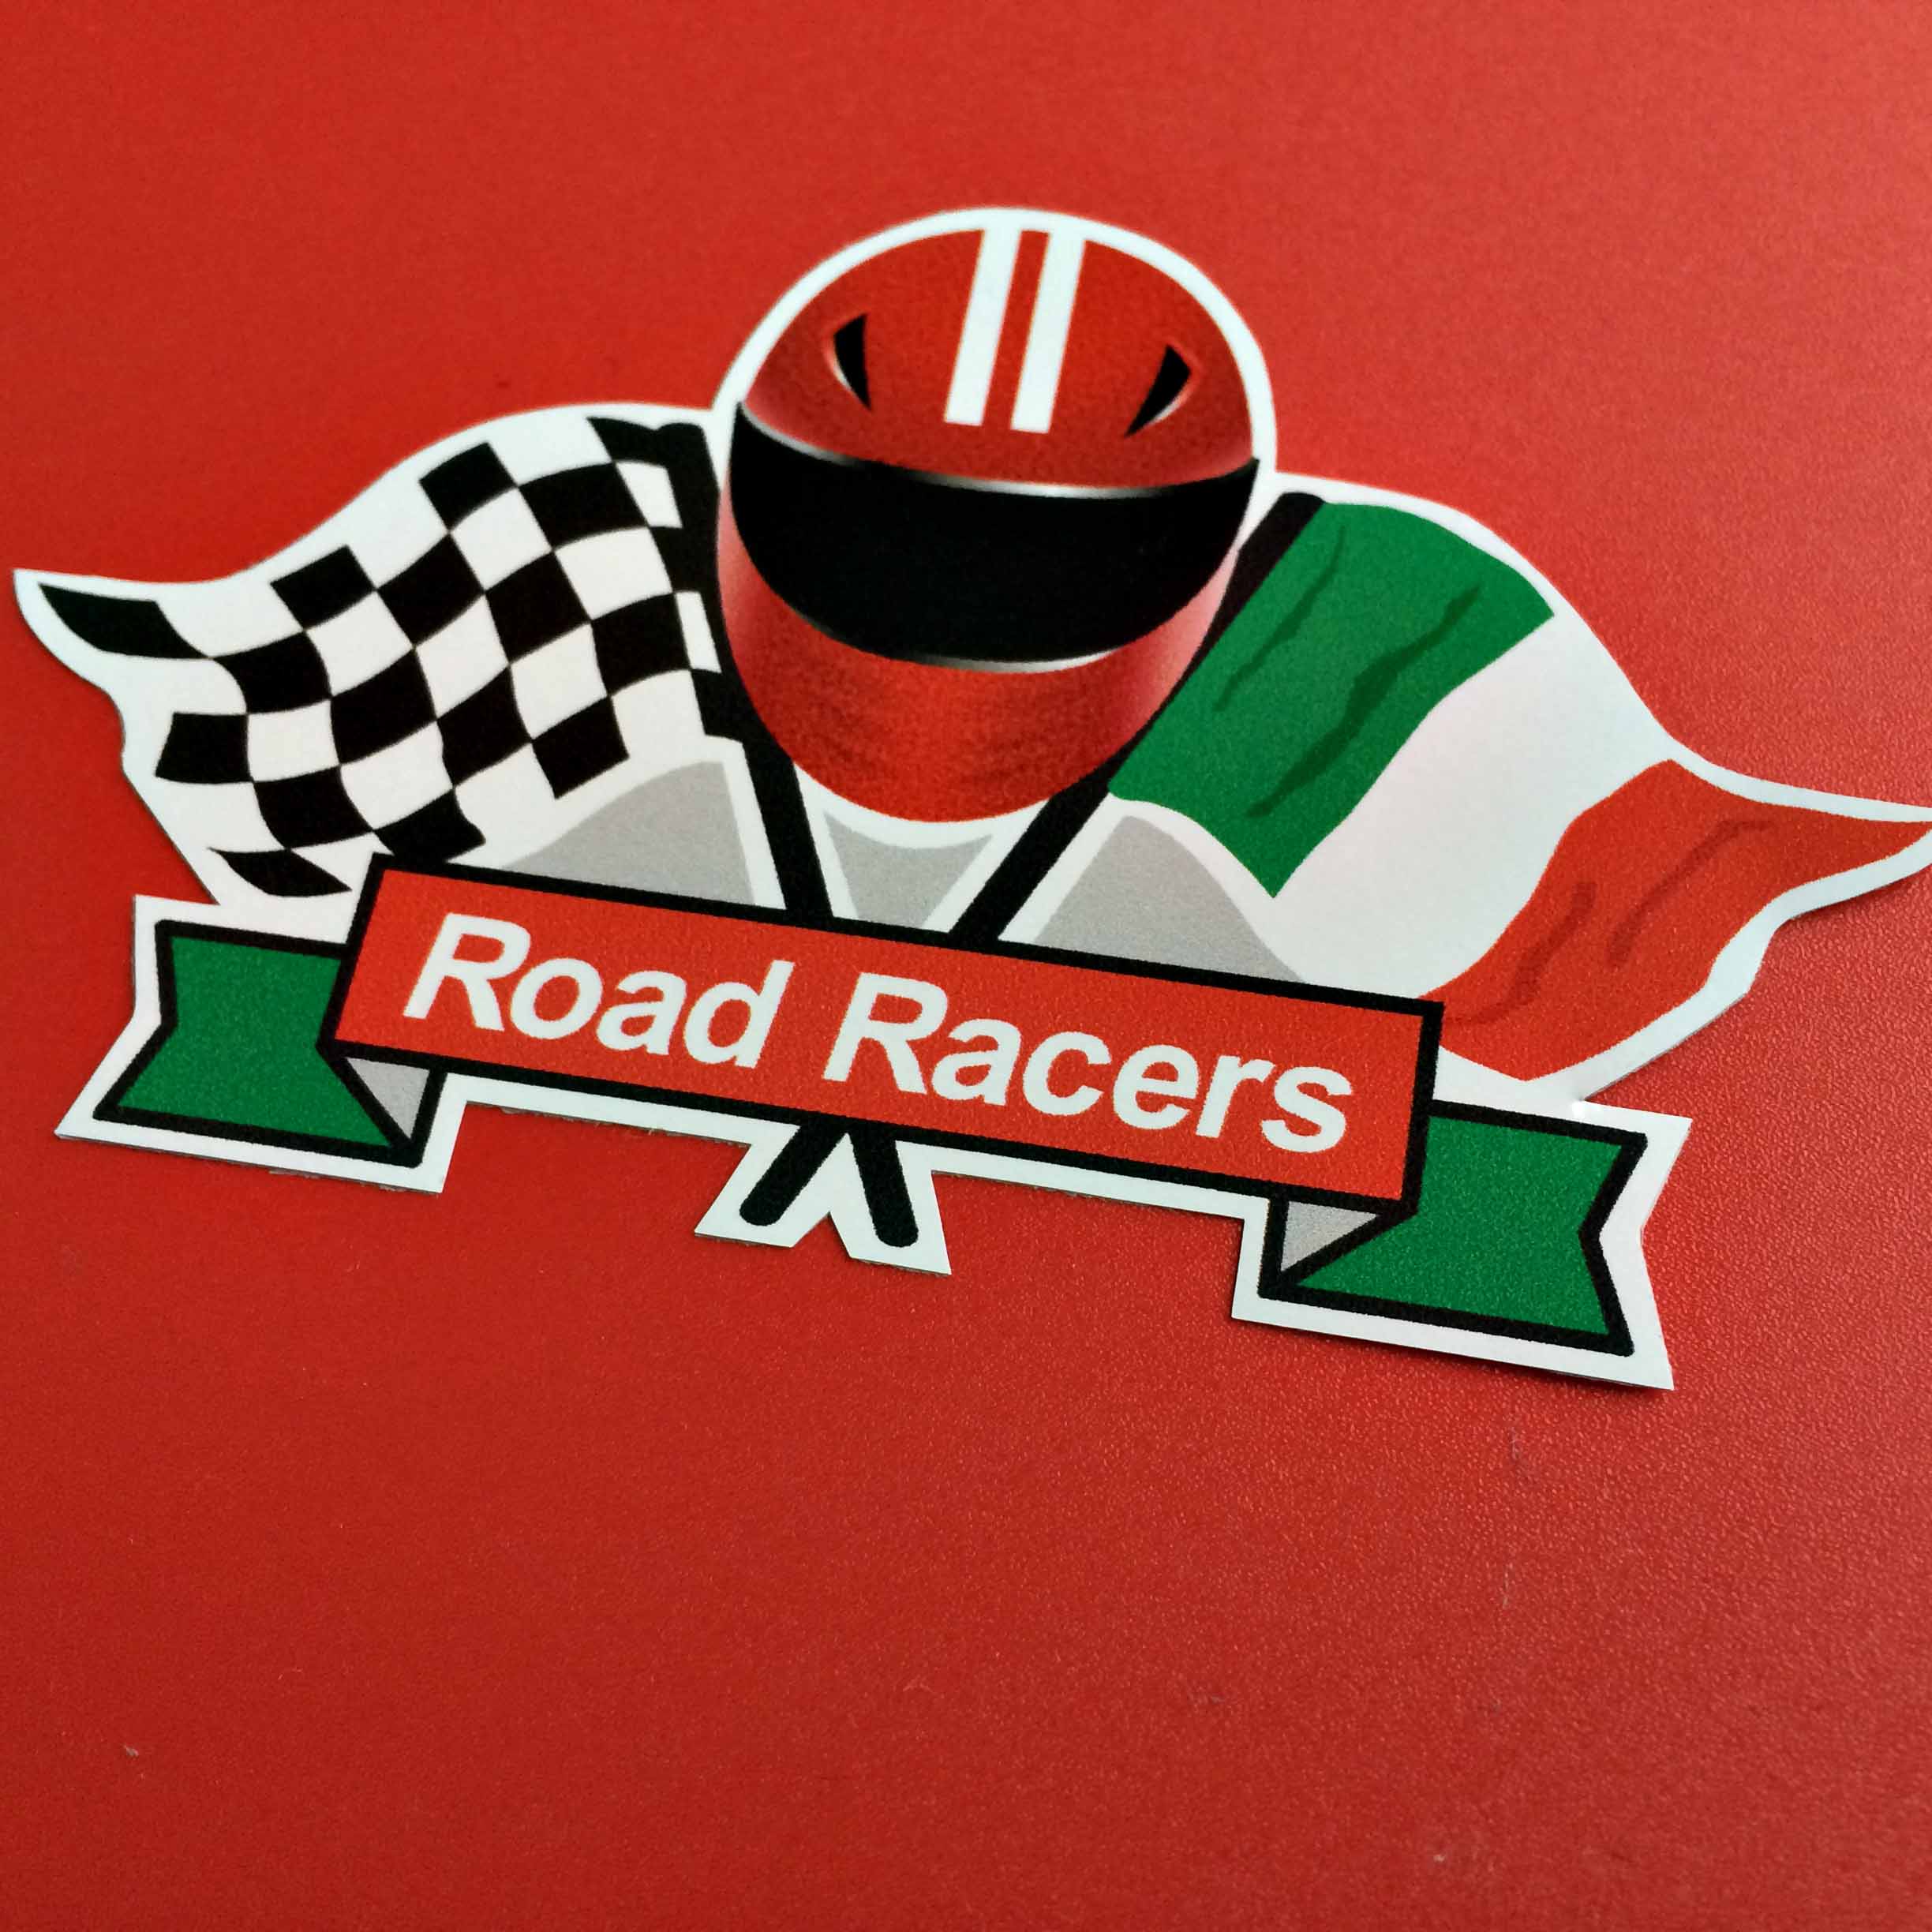 Road Racers in white lettering on a red and green banner. A red motorcycle helmet with two white vertical stripes sits between crossed flags; a chequered and Italy flag.